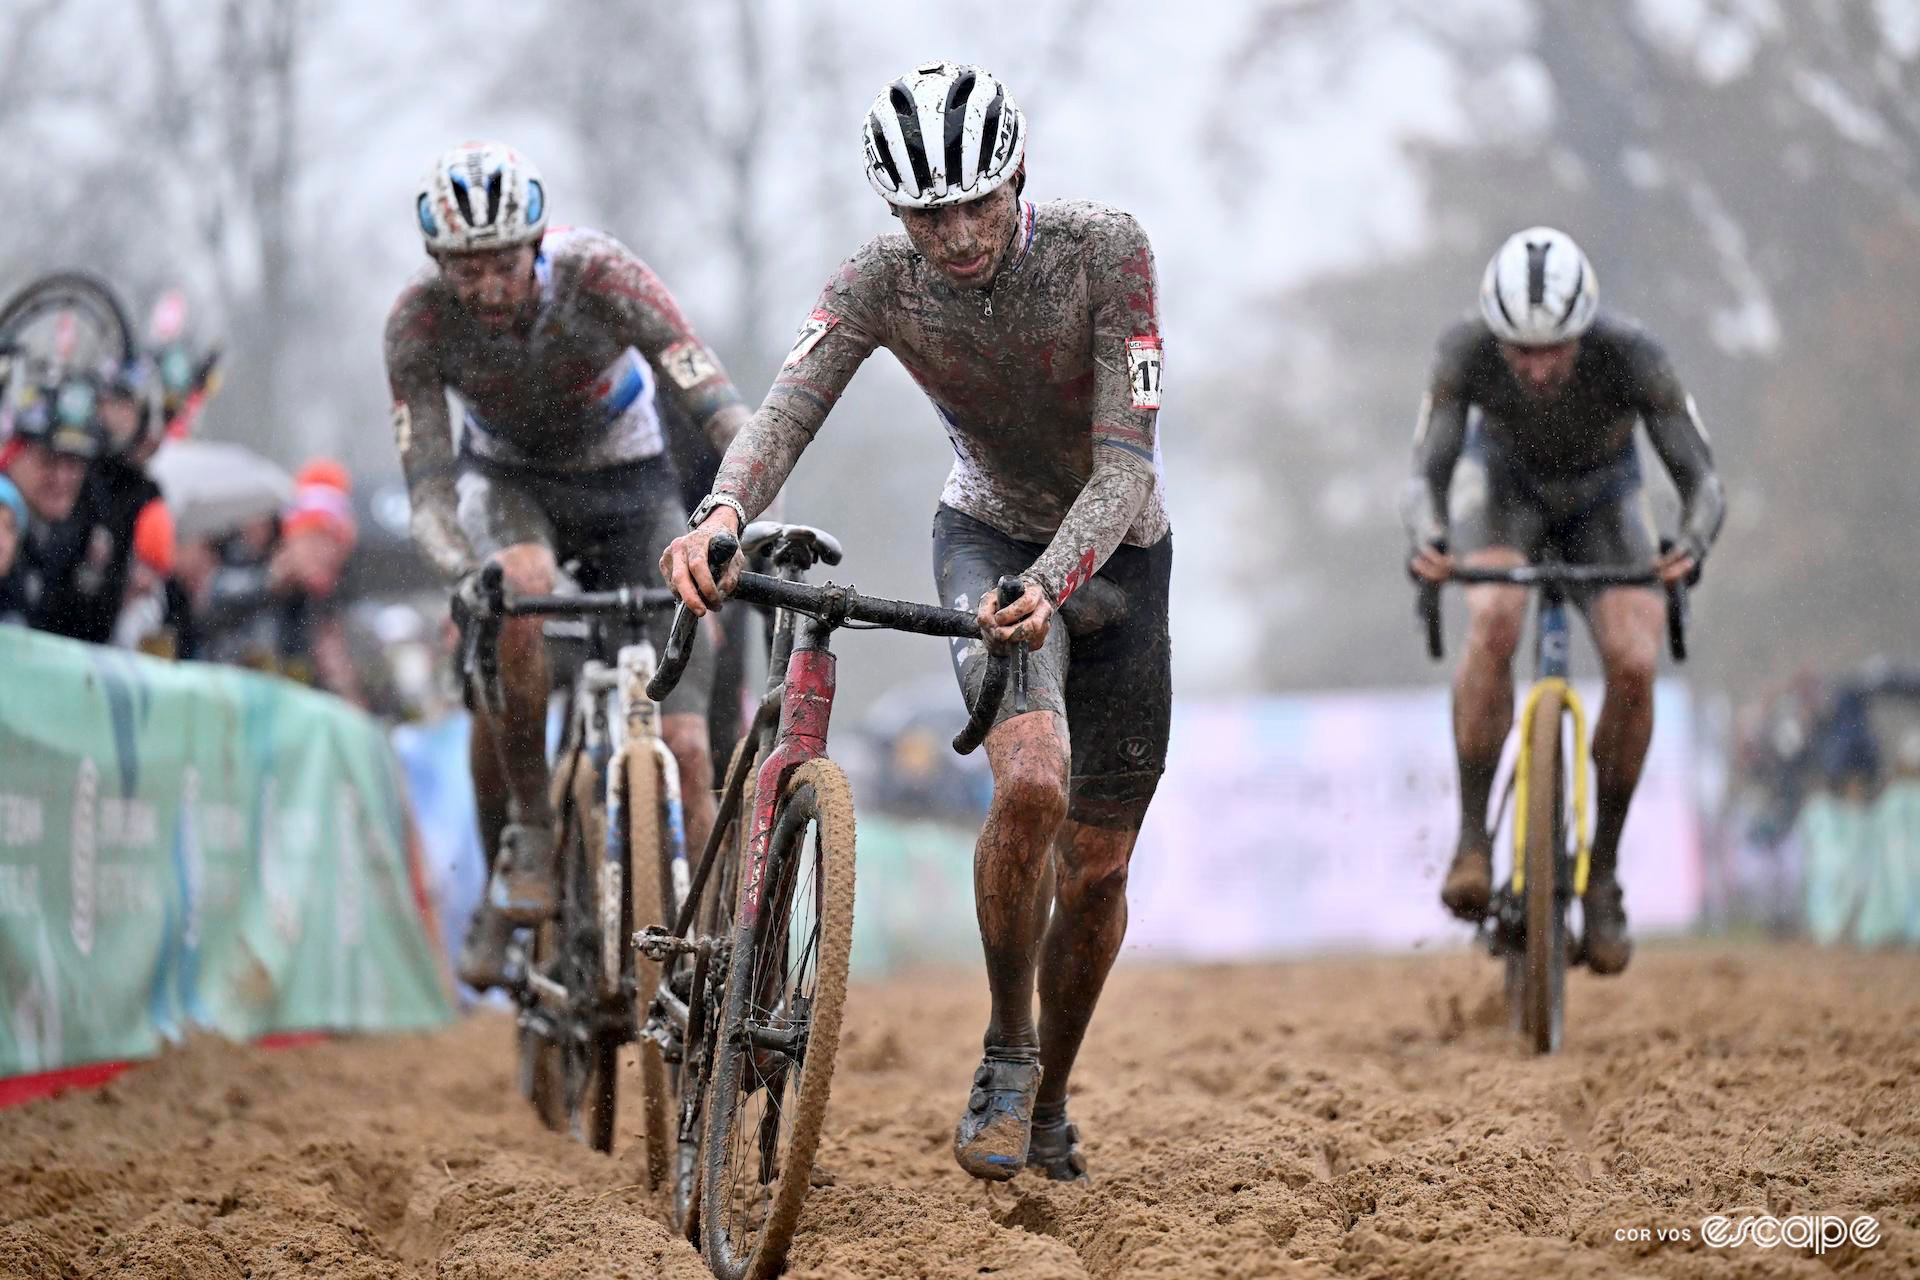 A dejected-looking Cameron Mason's white British national champion's jersey is almost completely covered in mud as he runs with his bike through the sandpit during CX World Cup Dublin.